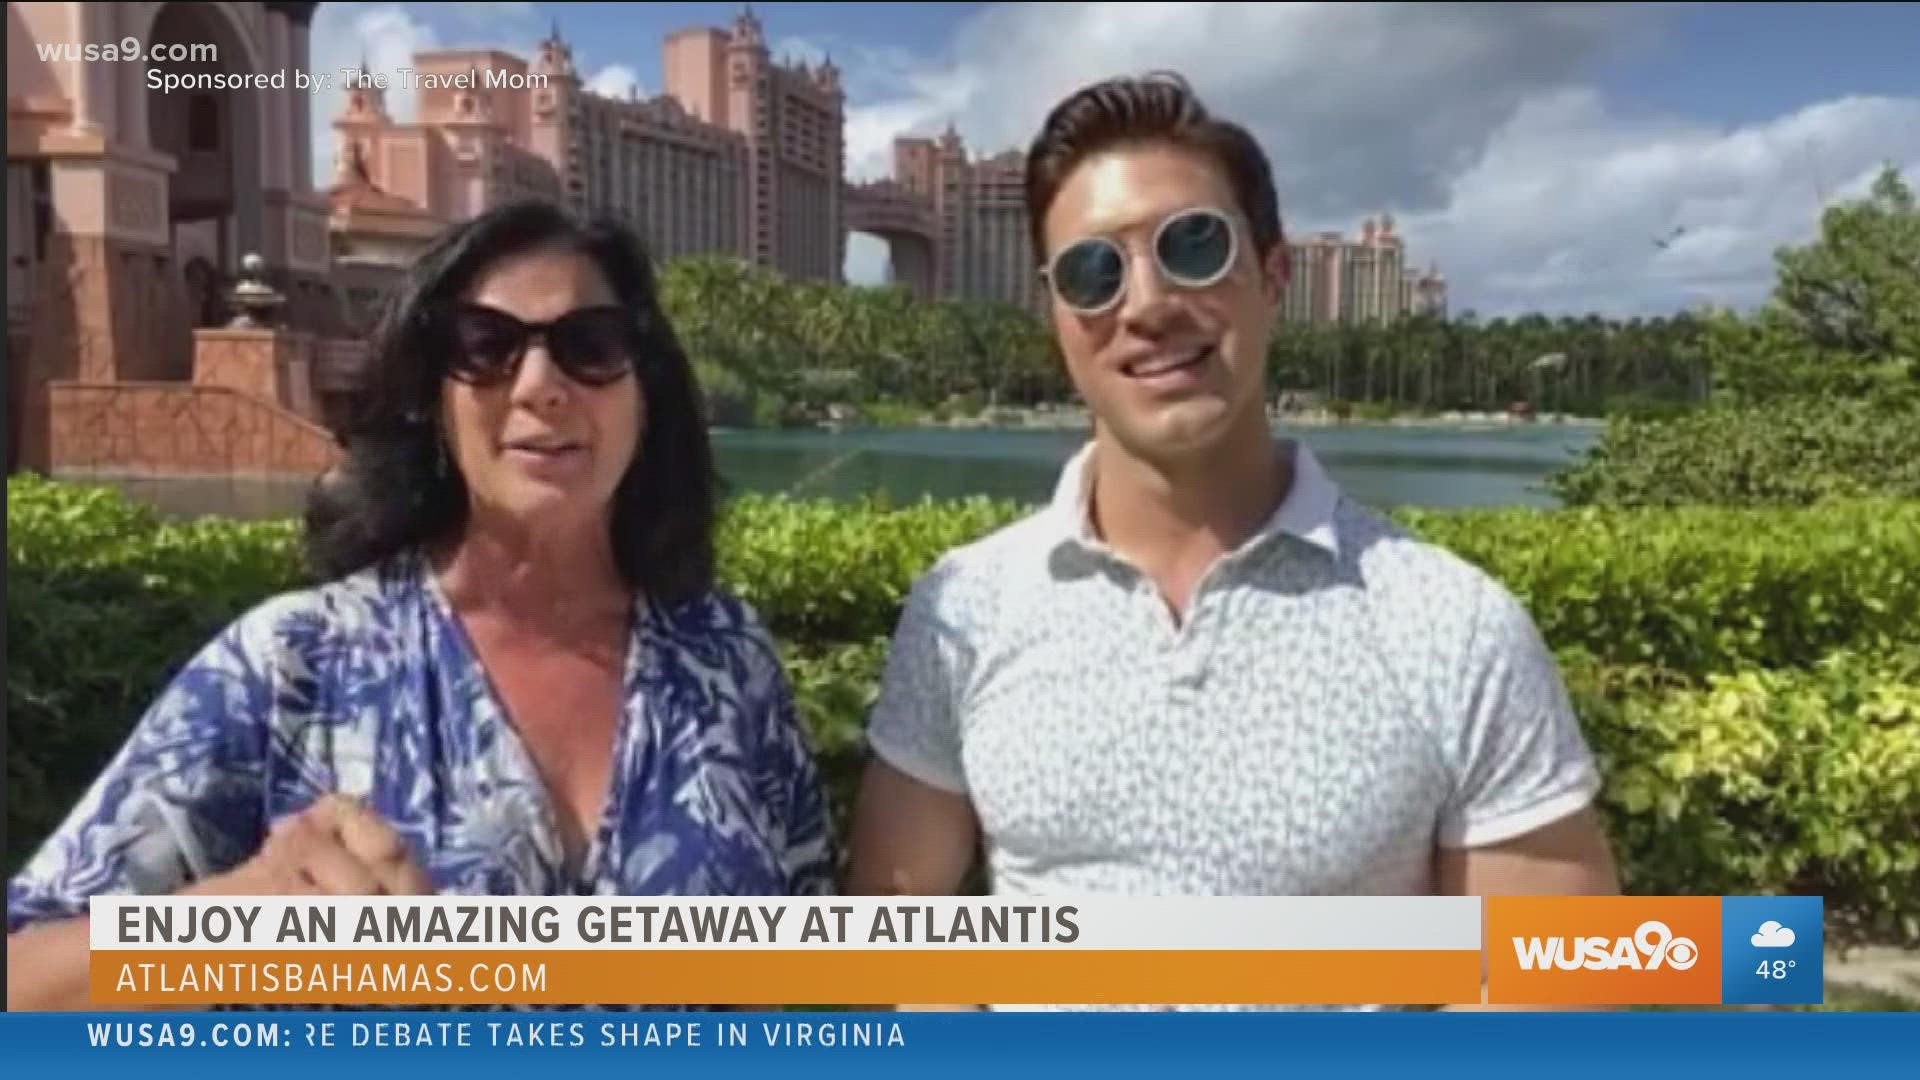 The Travel Mom is back!  Emily and Tommy Didario explain the amazing vacation that you can enjoy at Atlantis Bahamas.  Sponsored by The Travel Mom.